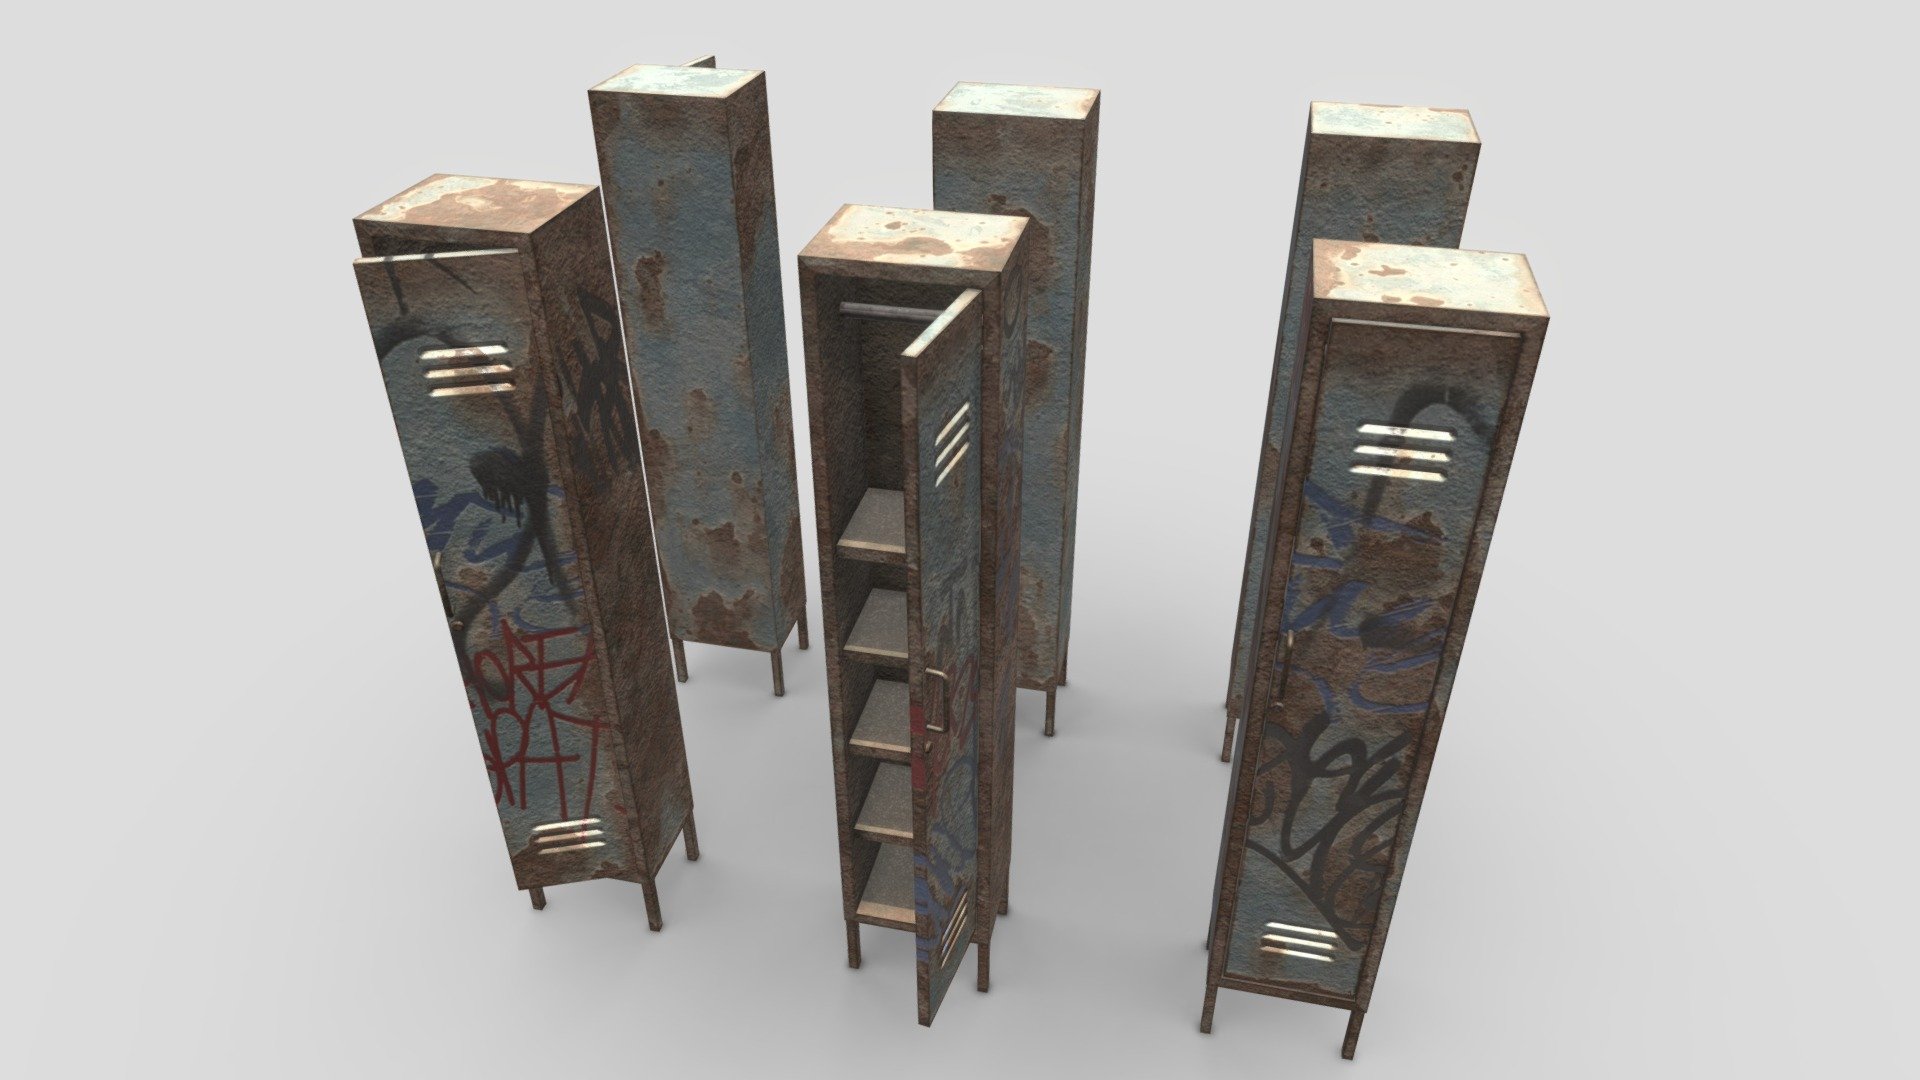 This set is suitable for filling any game, any visualizations. Modular sections are easy to piece together in a variety of combinations. It's readily available to import in Unity3D and Ue4. Very easy to modify. All materials and textures included. The texture is made in substance painter.

Textures:

2048x2048 PBR, png  (2 versions, with and without graffiti) - Abandoned Locker - 3D model by Crazy_8 (@korboleevd) 3d model